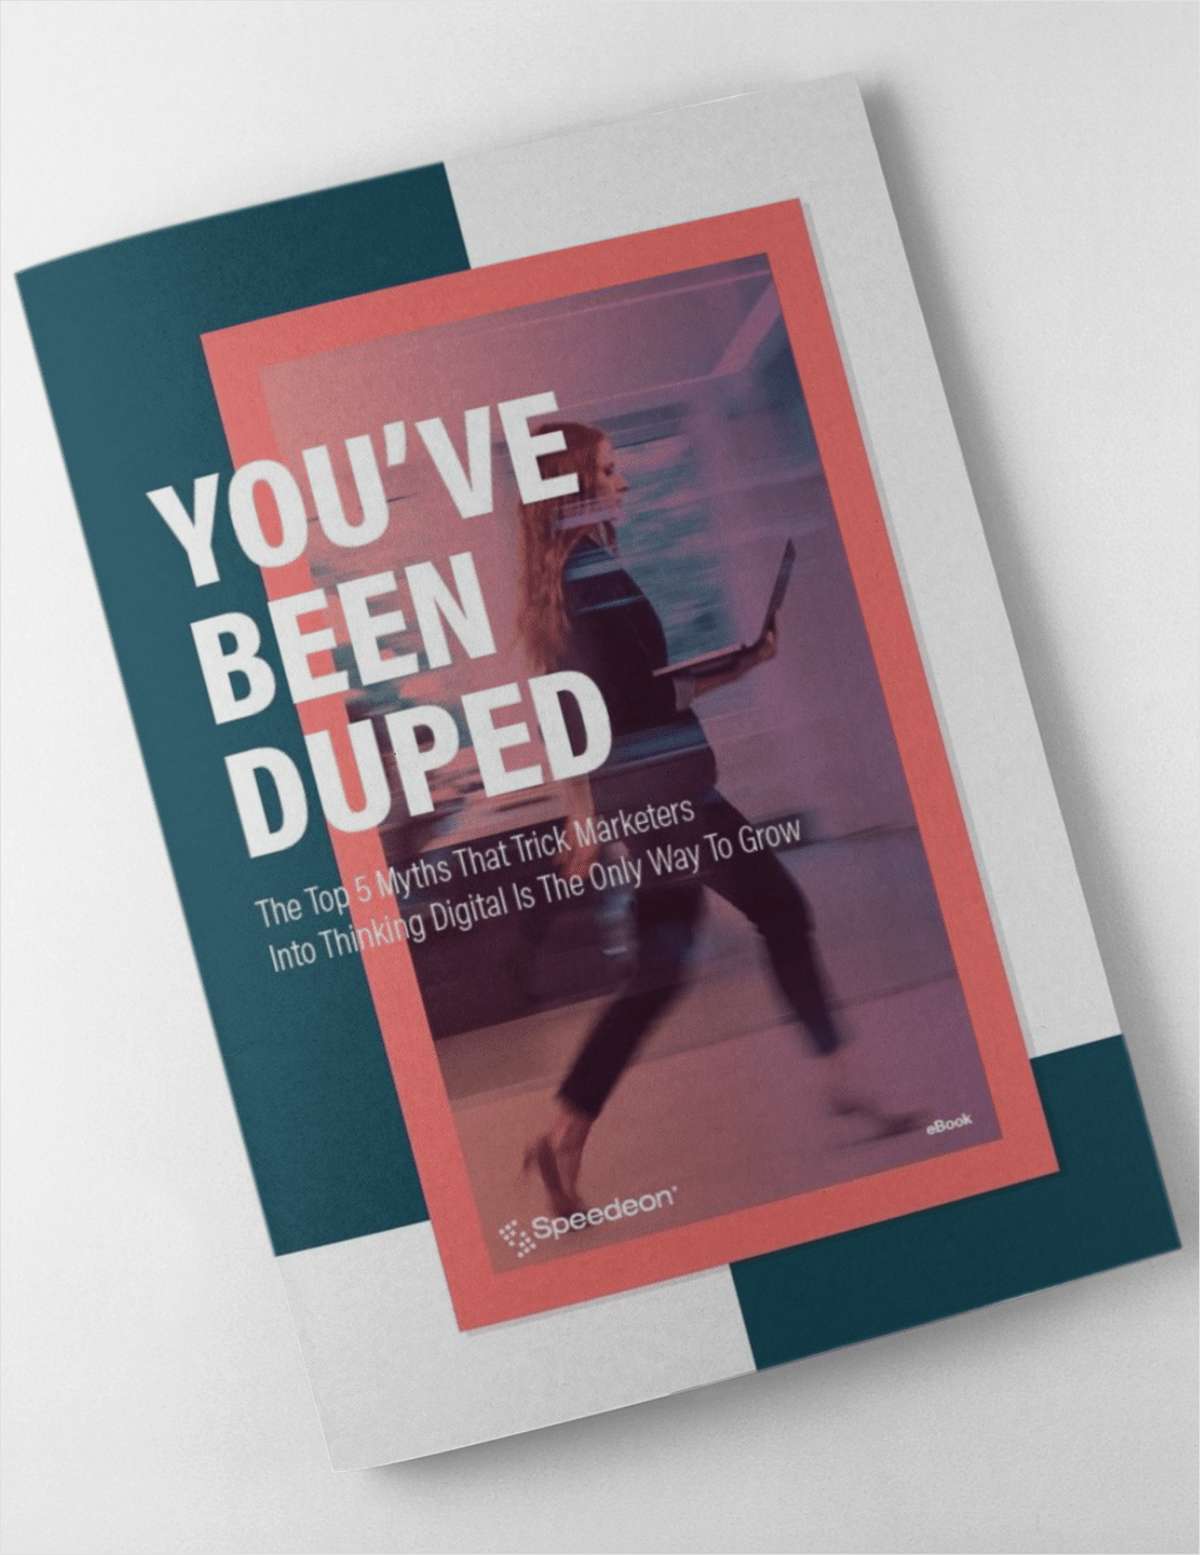 You've Been Duped: The Top 5 Myths that are Tricking D2C Marketers Into Thinking Digital Is the Only Way to Grow